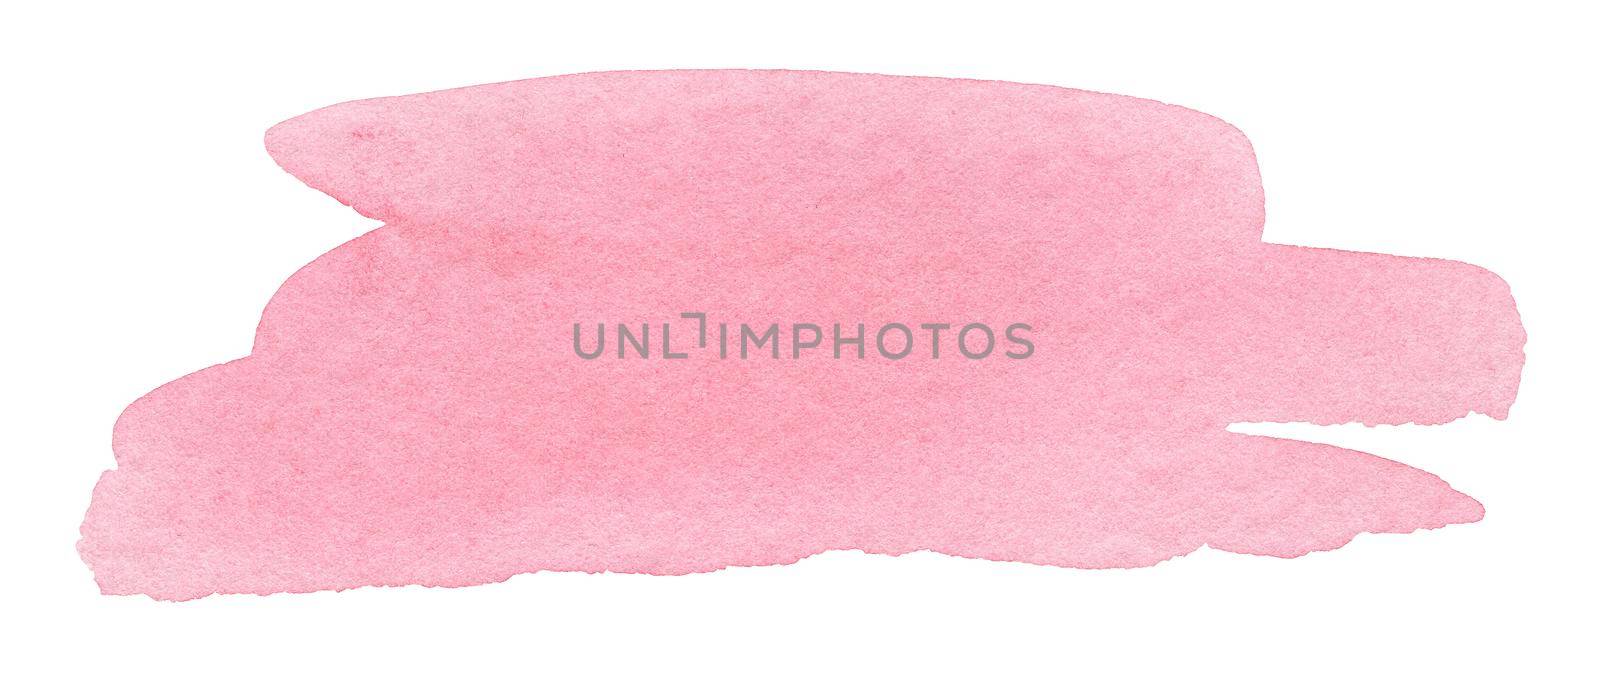 watercolor pink splash isolated on white background by dreamloud